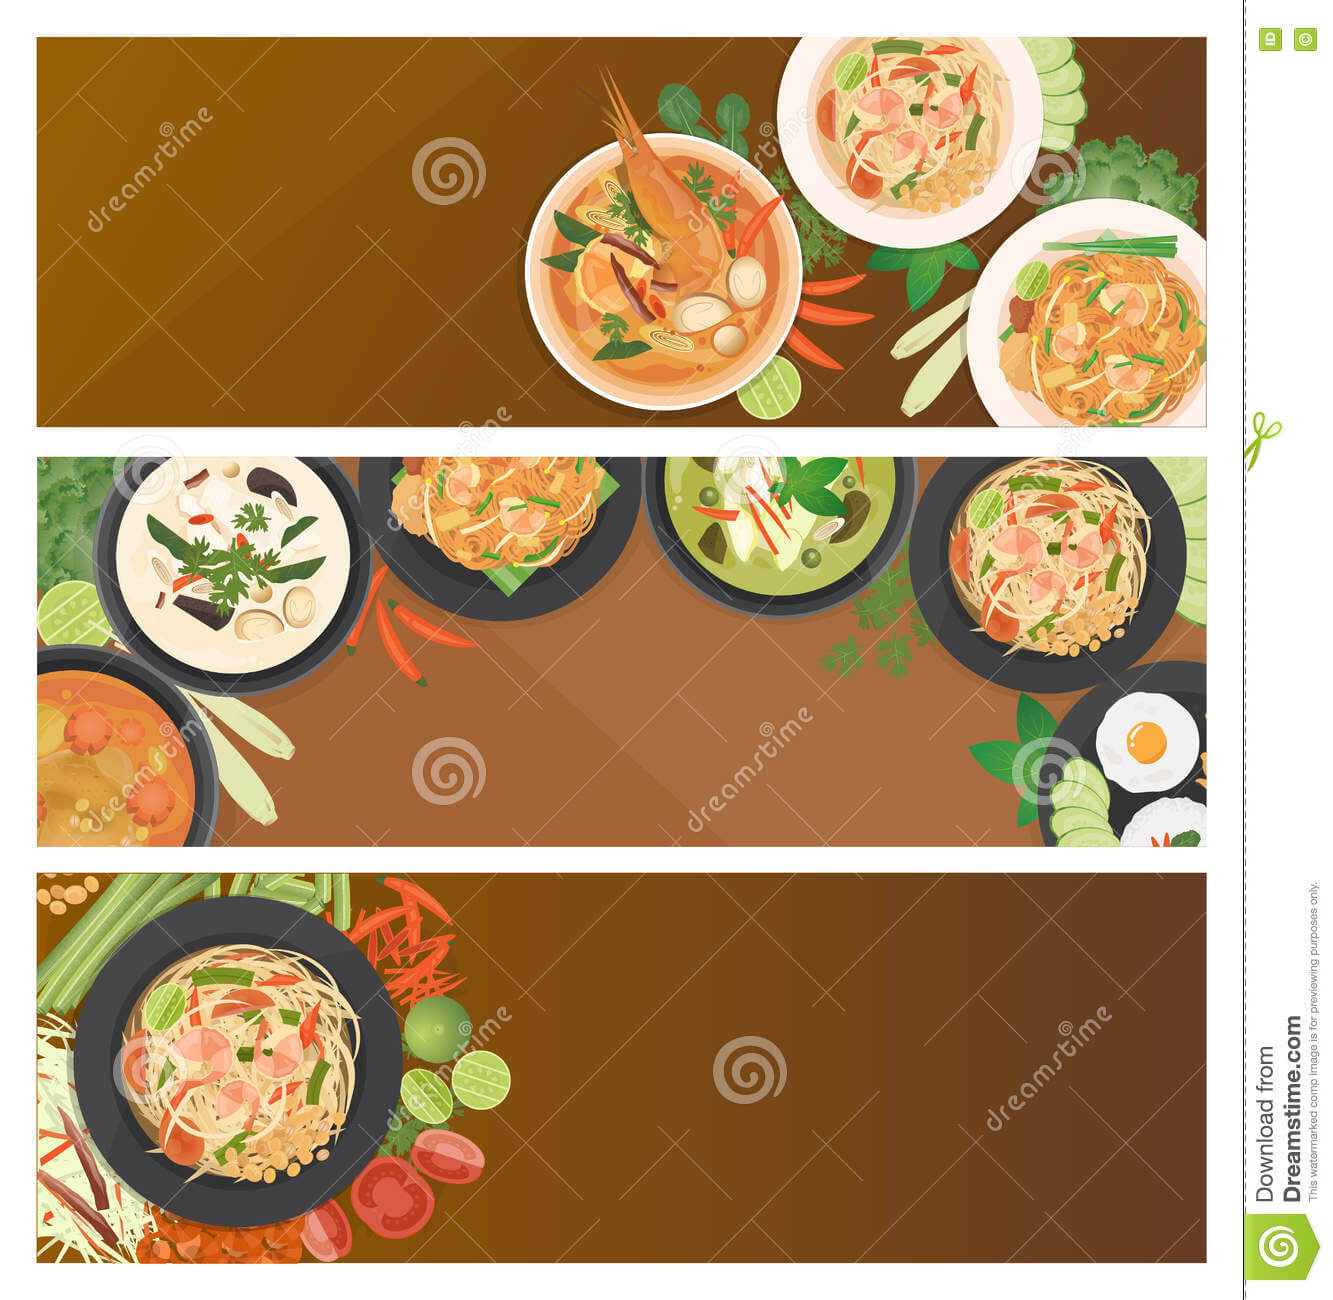 Thai Food Banner Template Stock Vector. Illustration Of For Food Banner Template